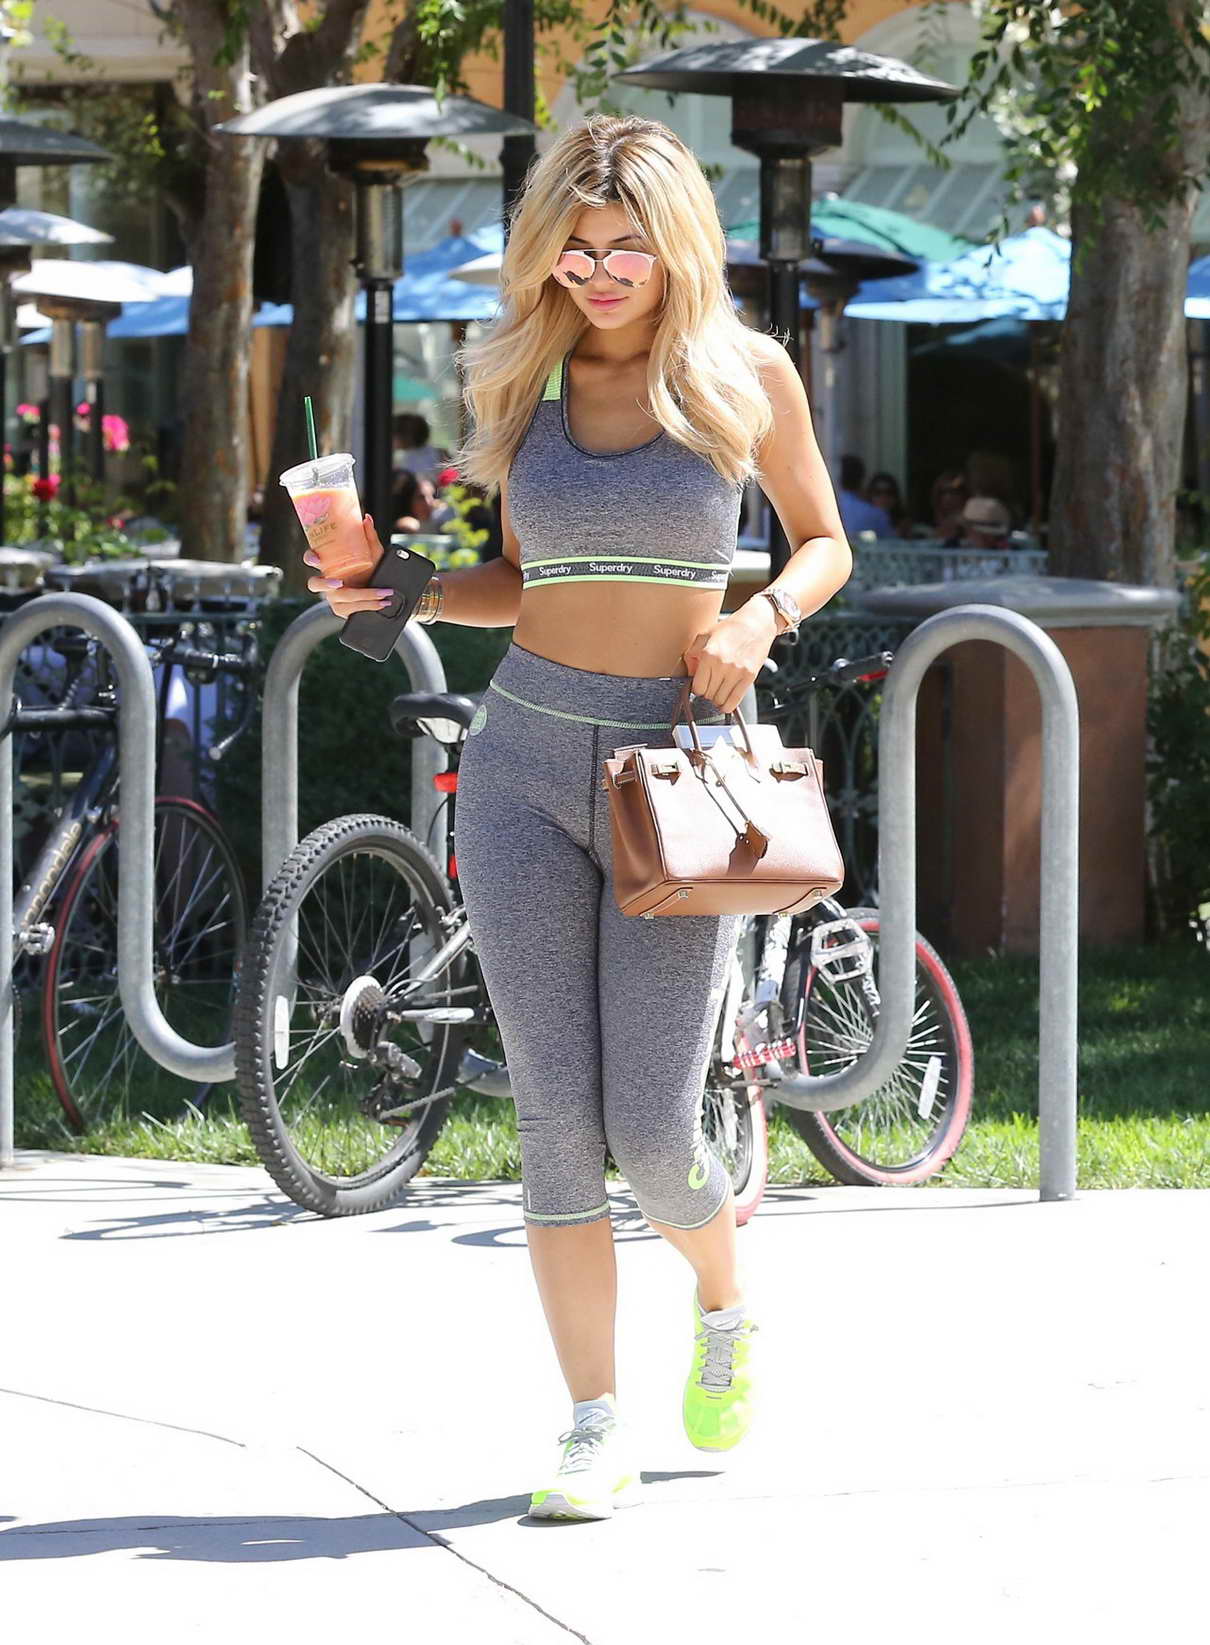 Kylie Jenner In Spandex Grabbing A Smoothie In Los Angeles 9 07 15 4 Lacelebs Co